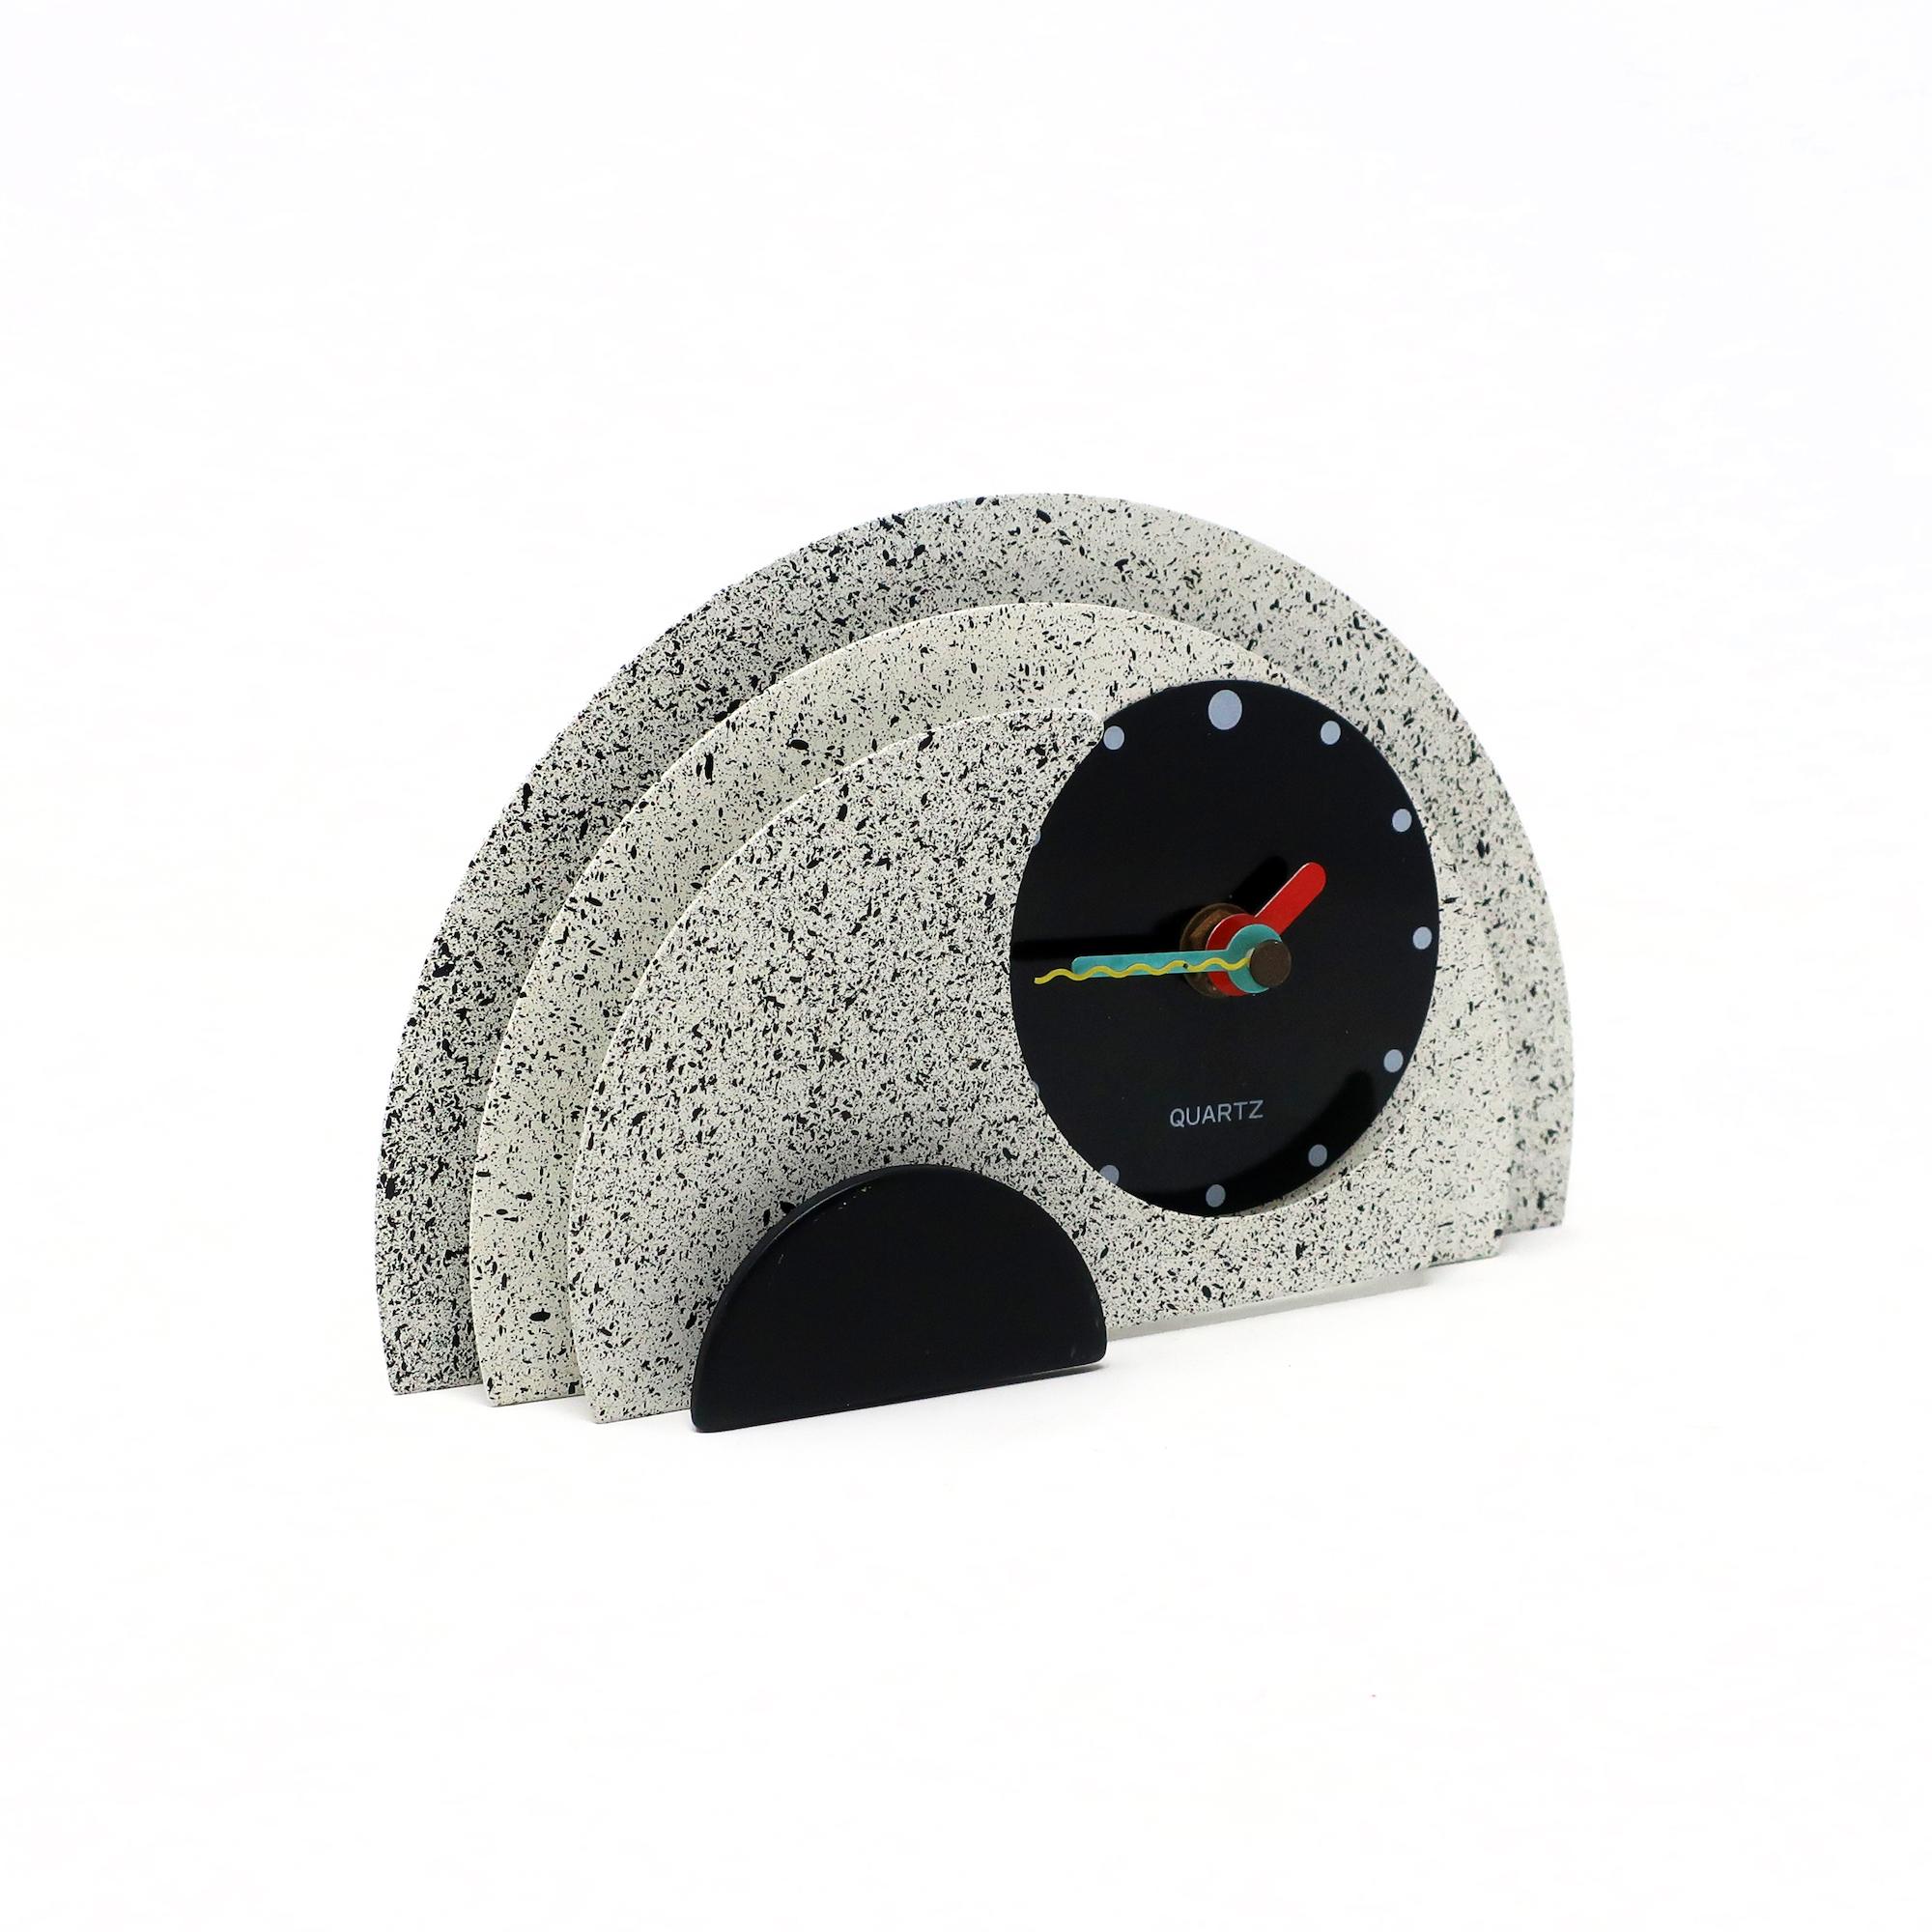 With a stunning combination of spotted gray and black enameled metal, black lucite accents, and primary colored hands, this postmodern clock is designed with a stacked semi-circle design that gives it a rare and beautiful three dimensionality. Bold